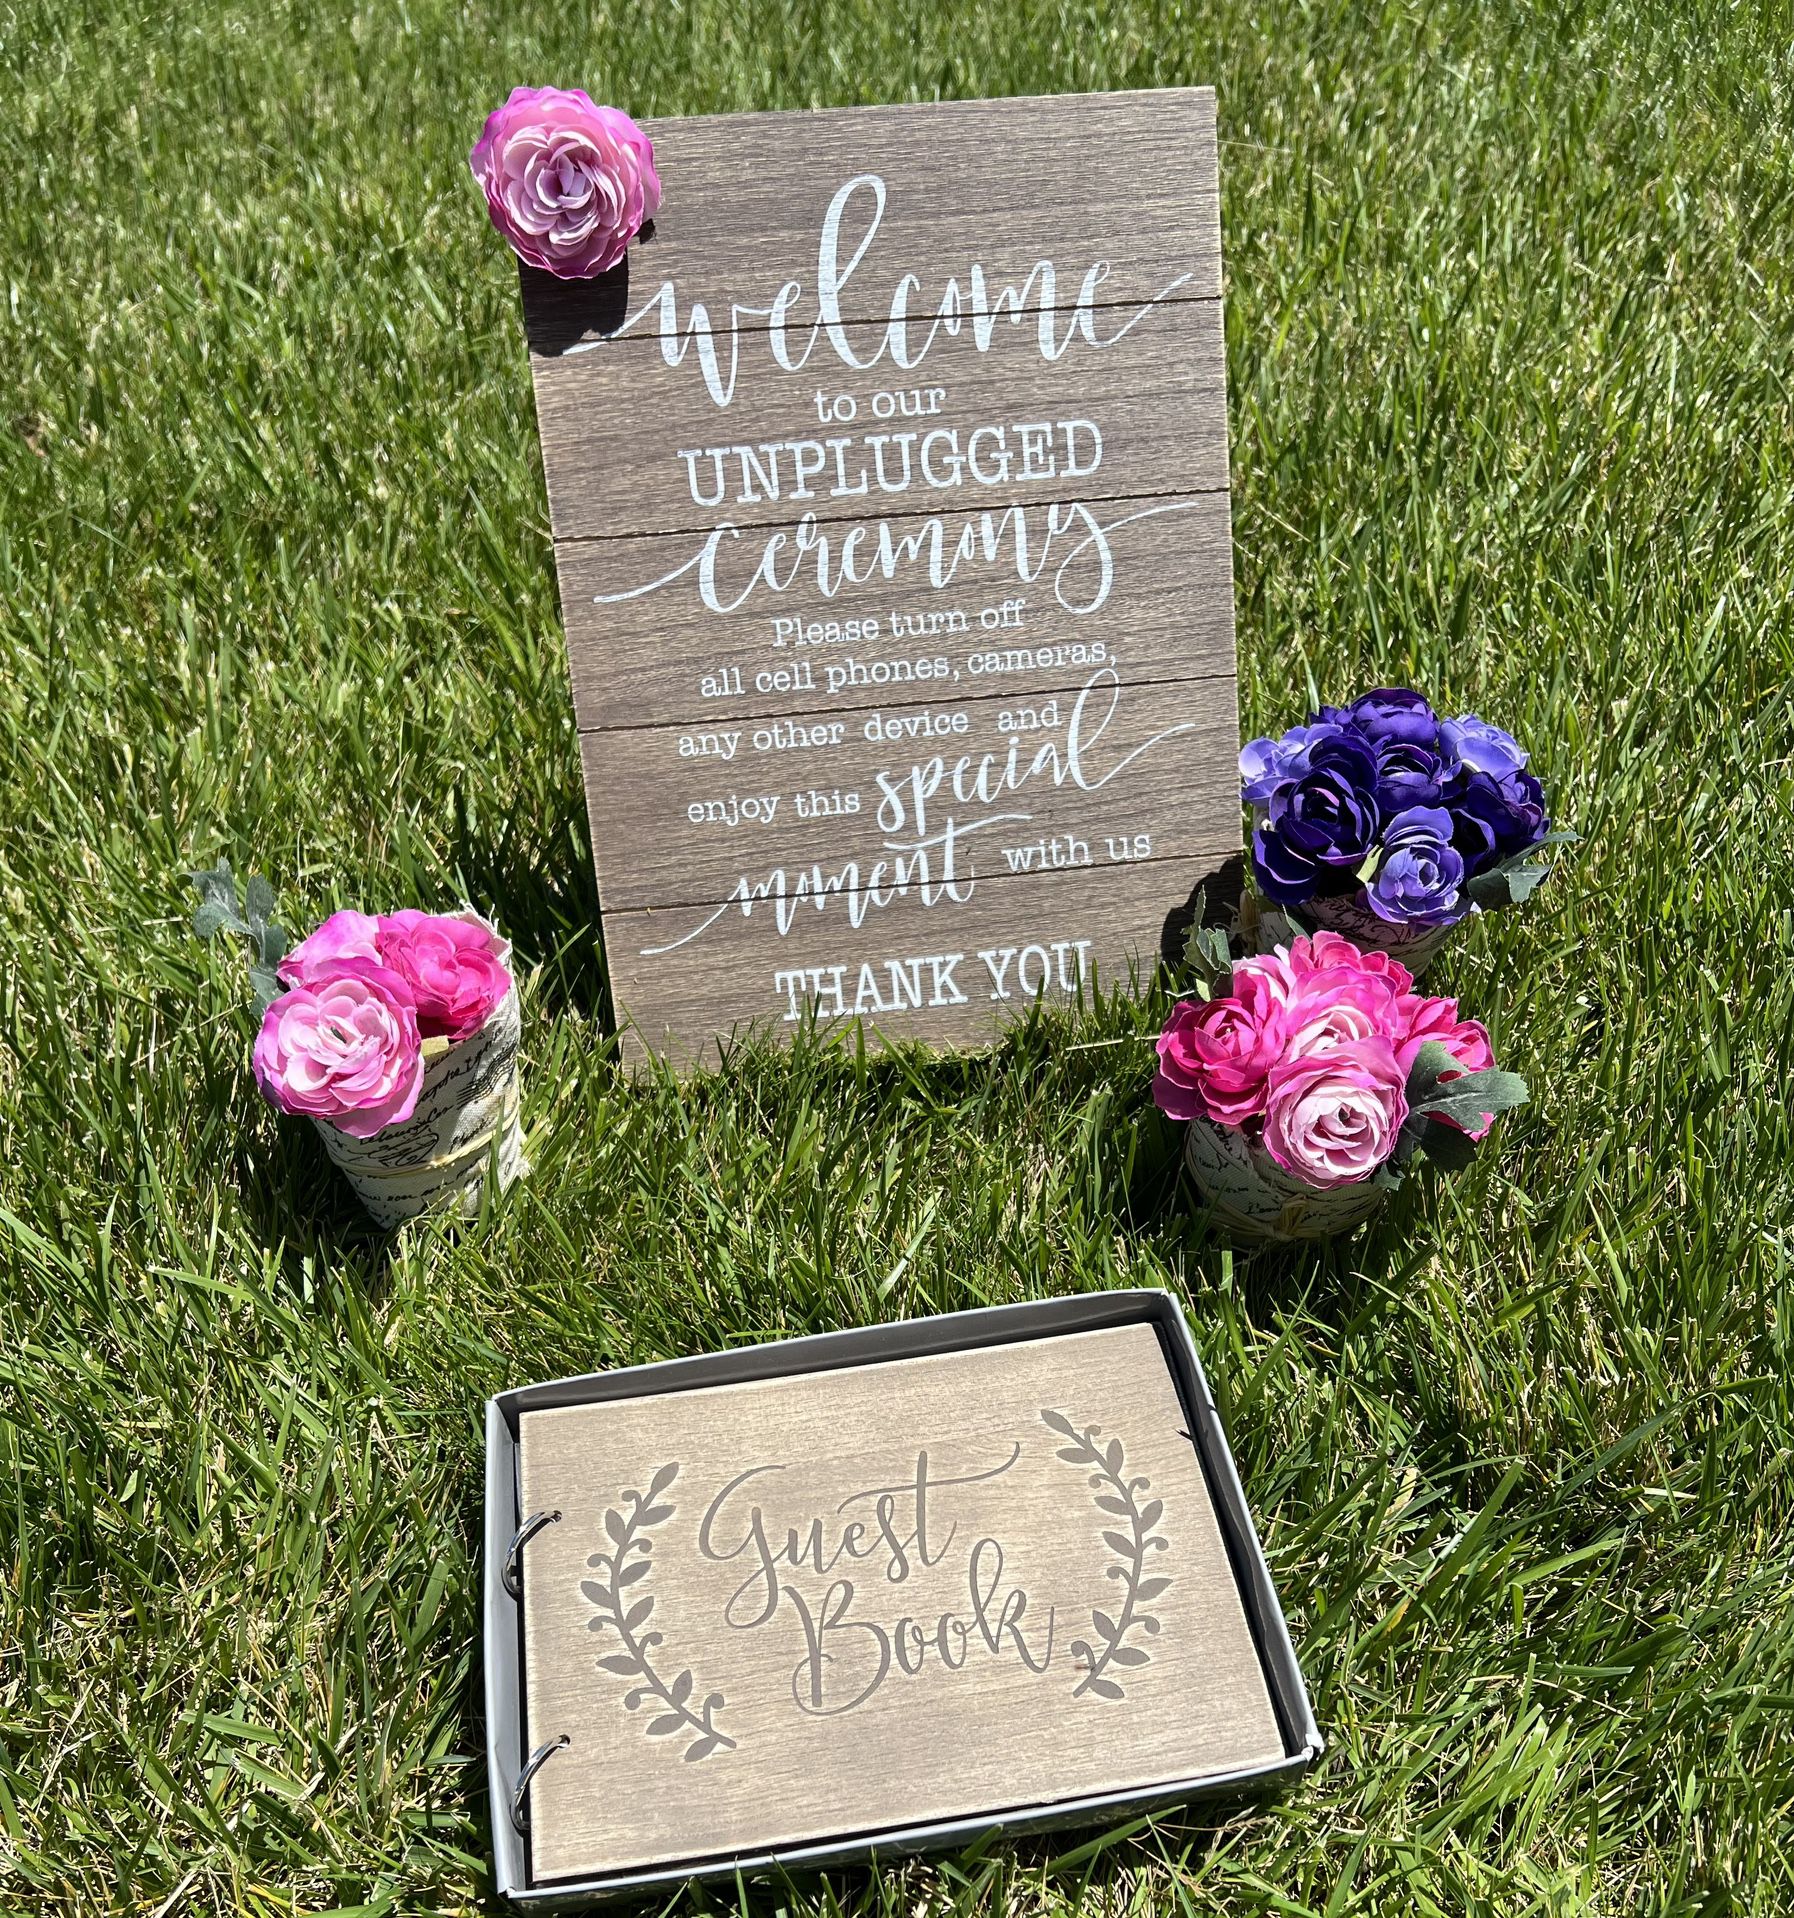 Wedding Decor: “Welcome To Our Unplugged Ceremony” Sign And Guest Book With Silk Flowers